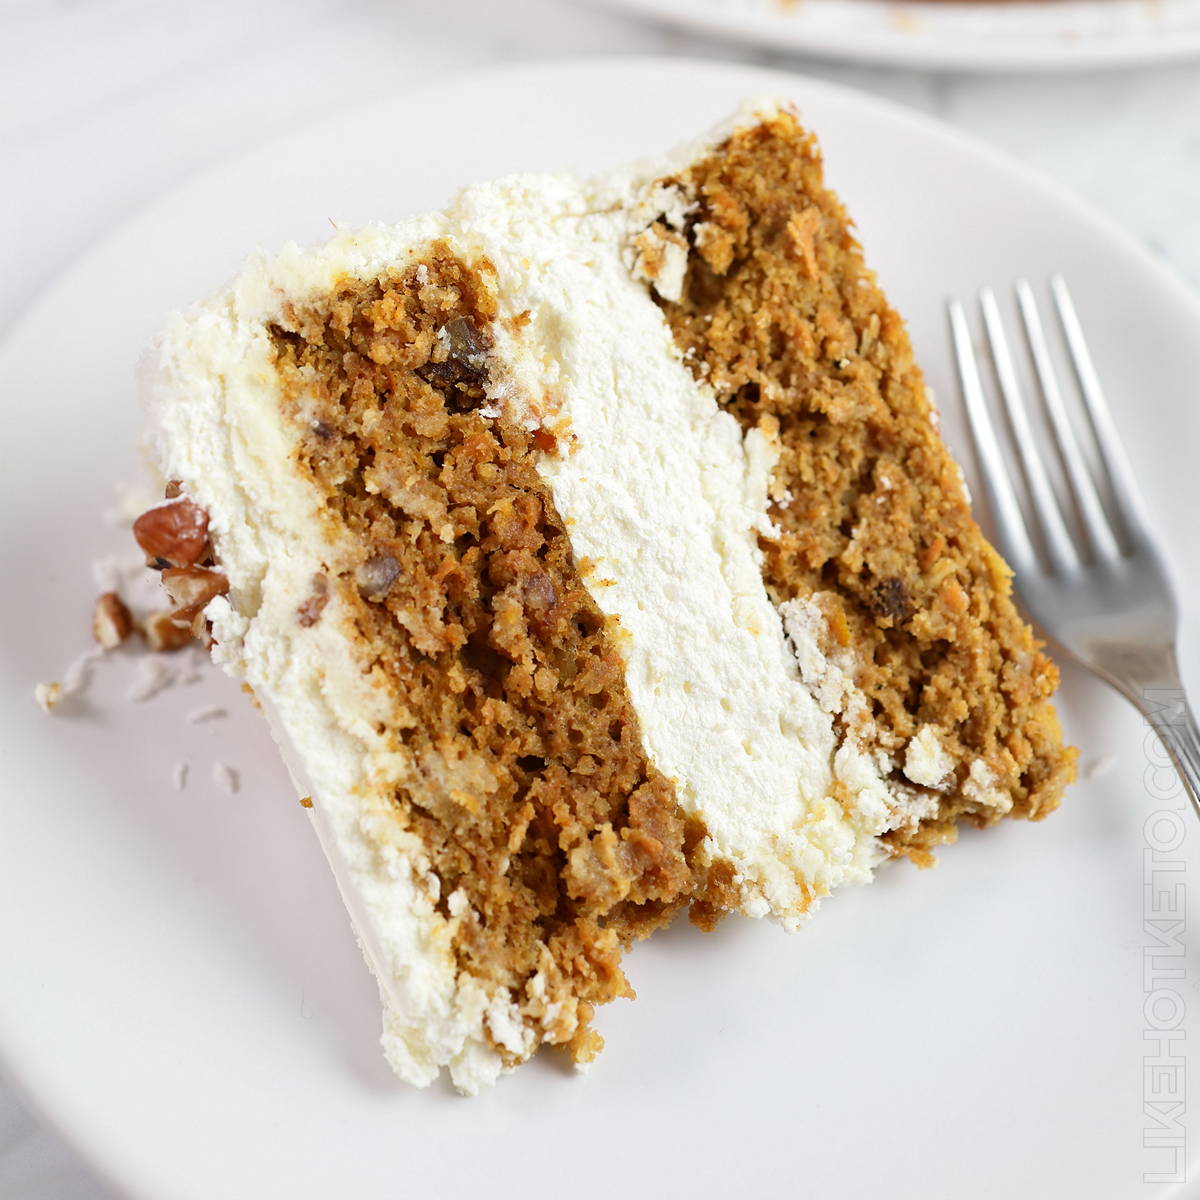 A slice of carrot cake with a thick cream cheese sugar-free frosting filling, on a white plate.